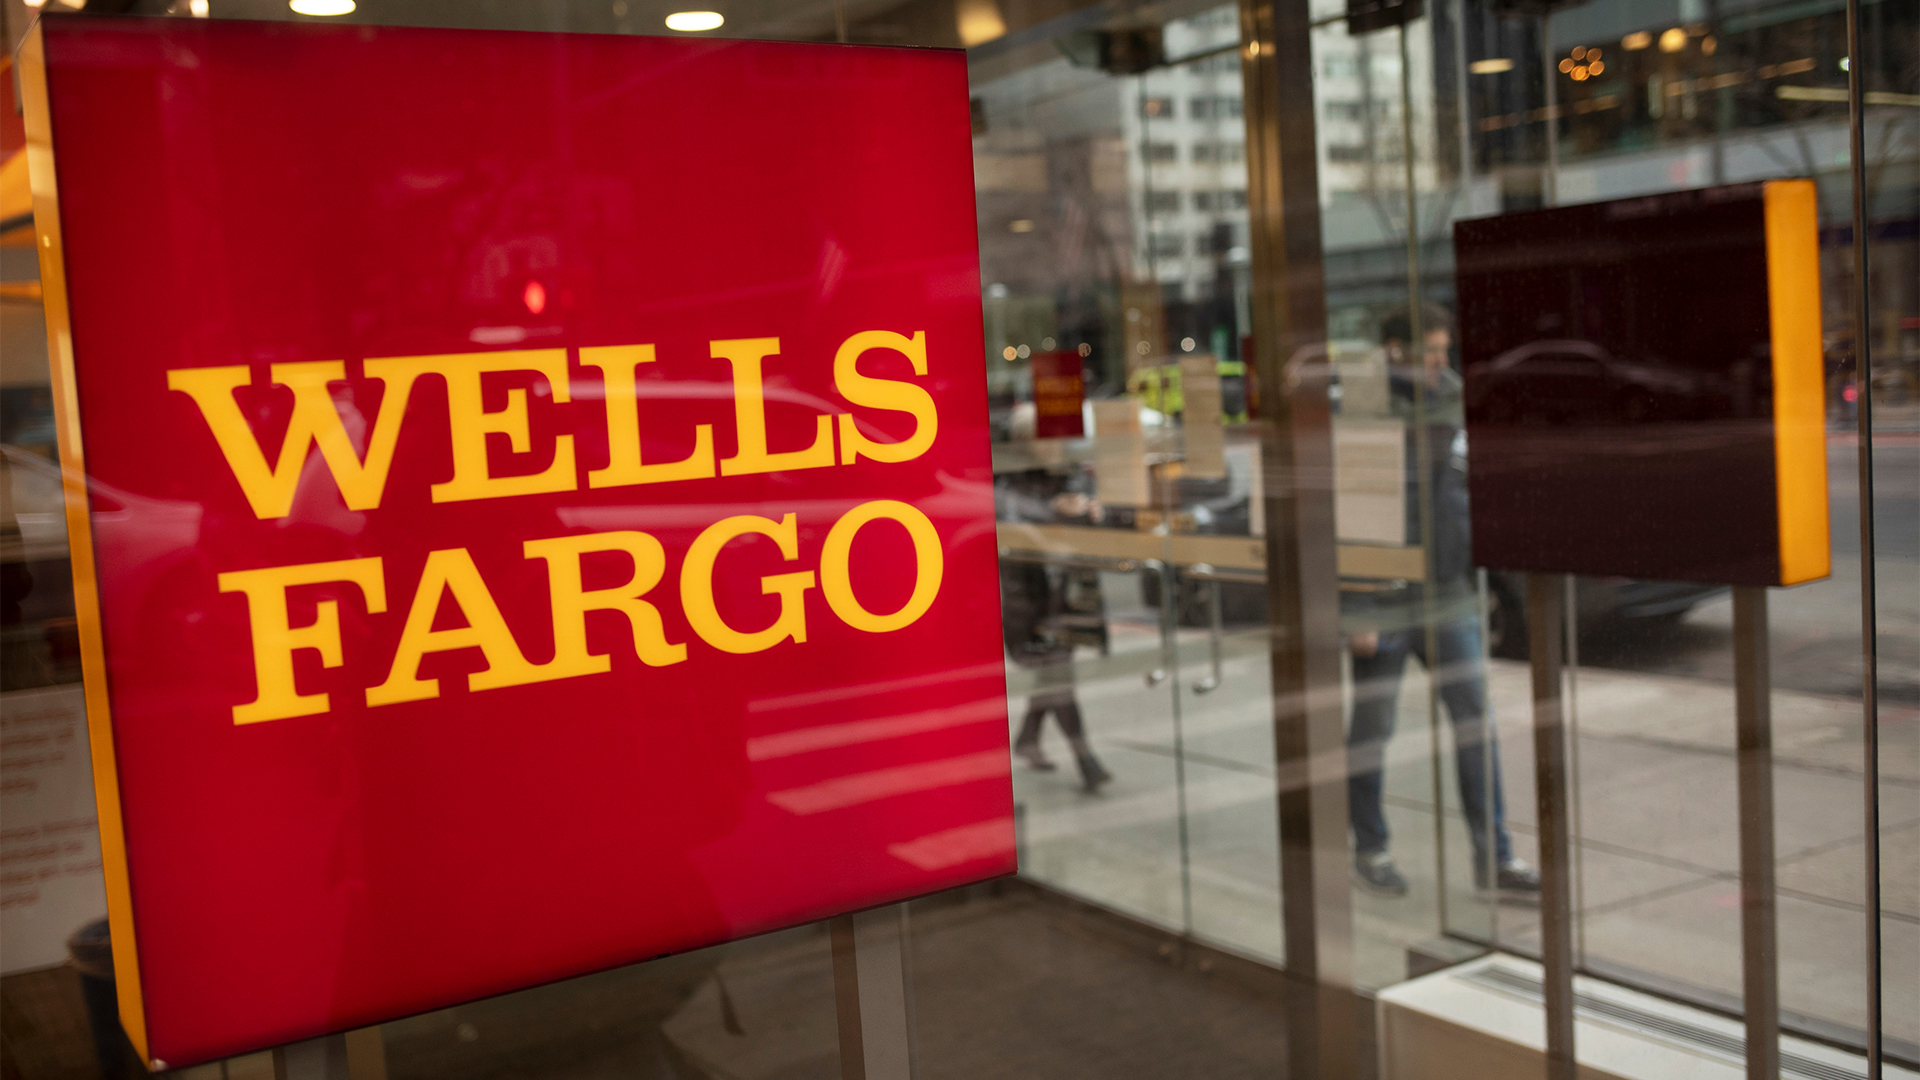 Former Wells Fargo Executive Alleges The Bank Held Fake Interviews With Women And People Of Color